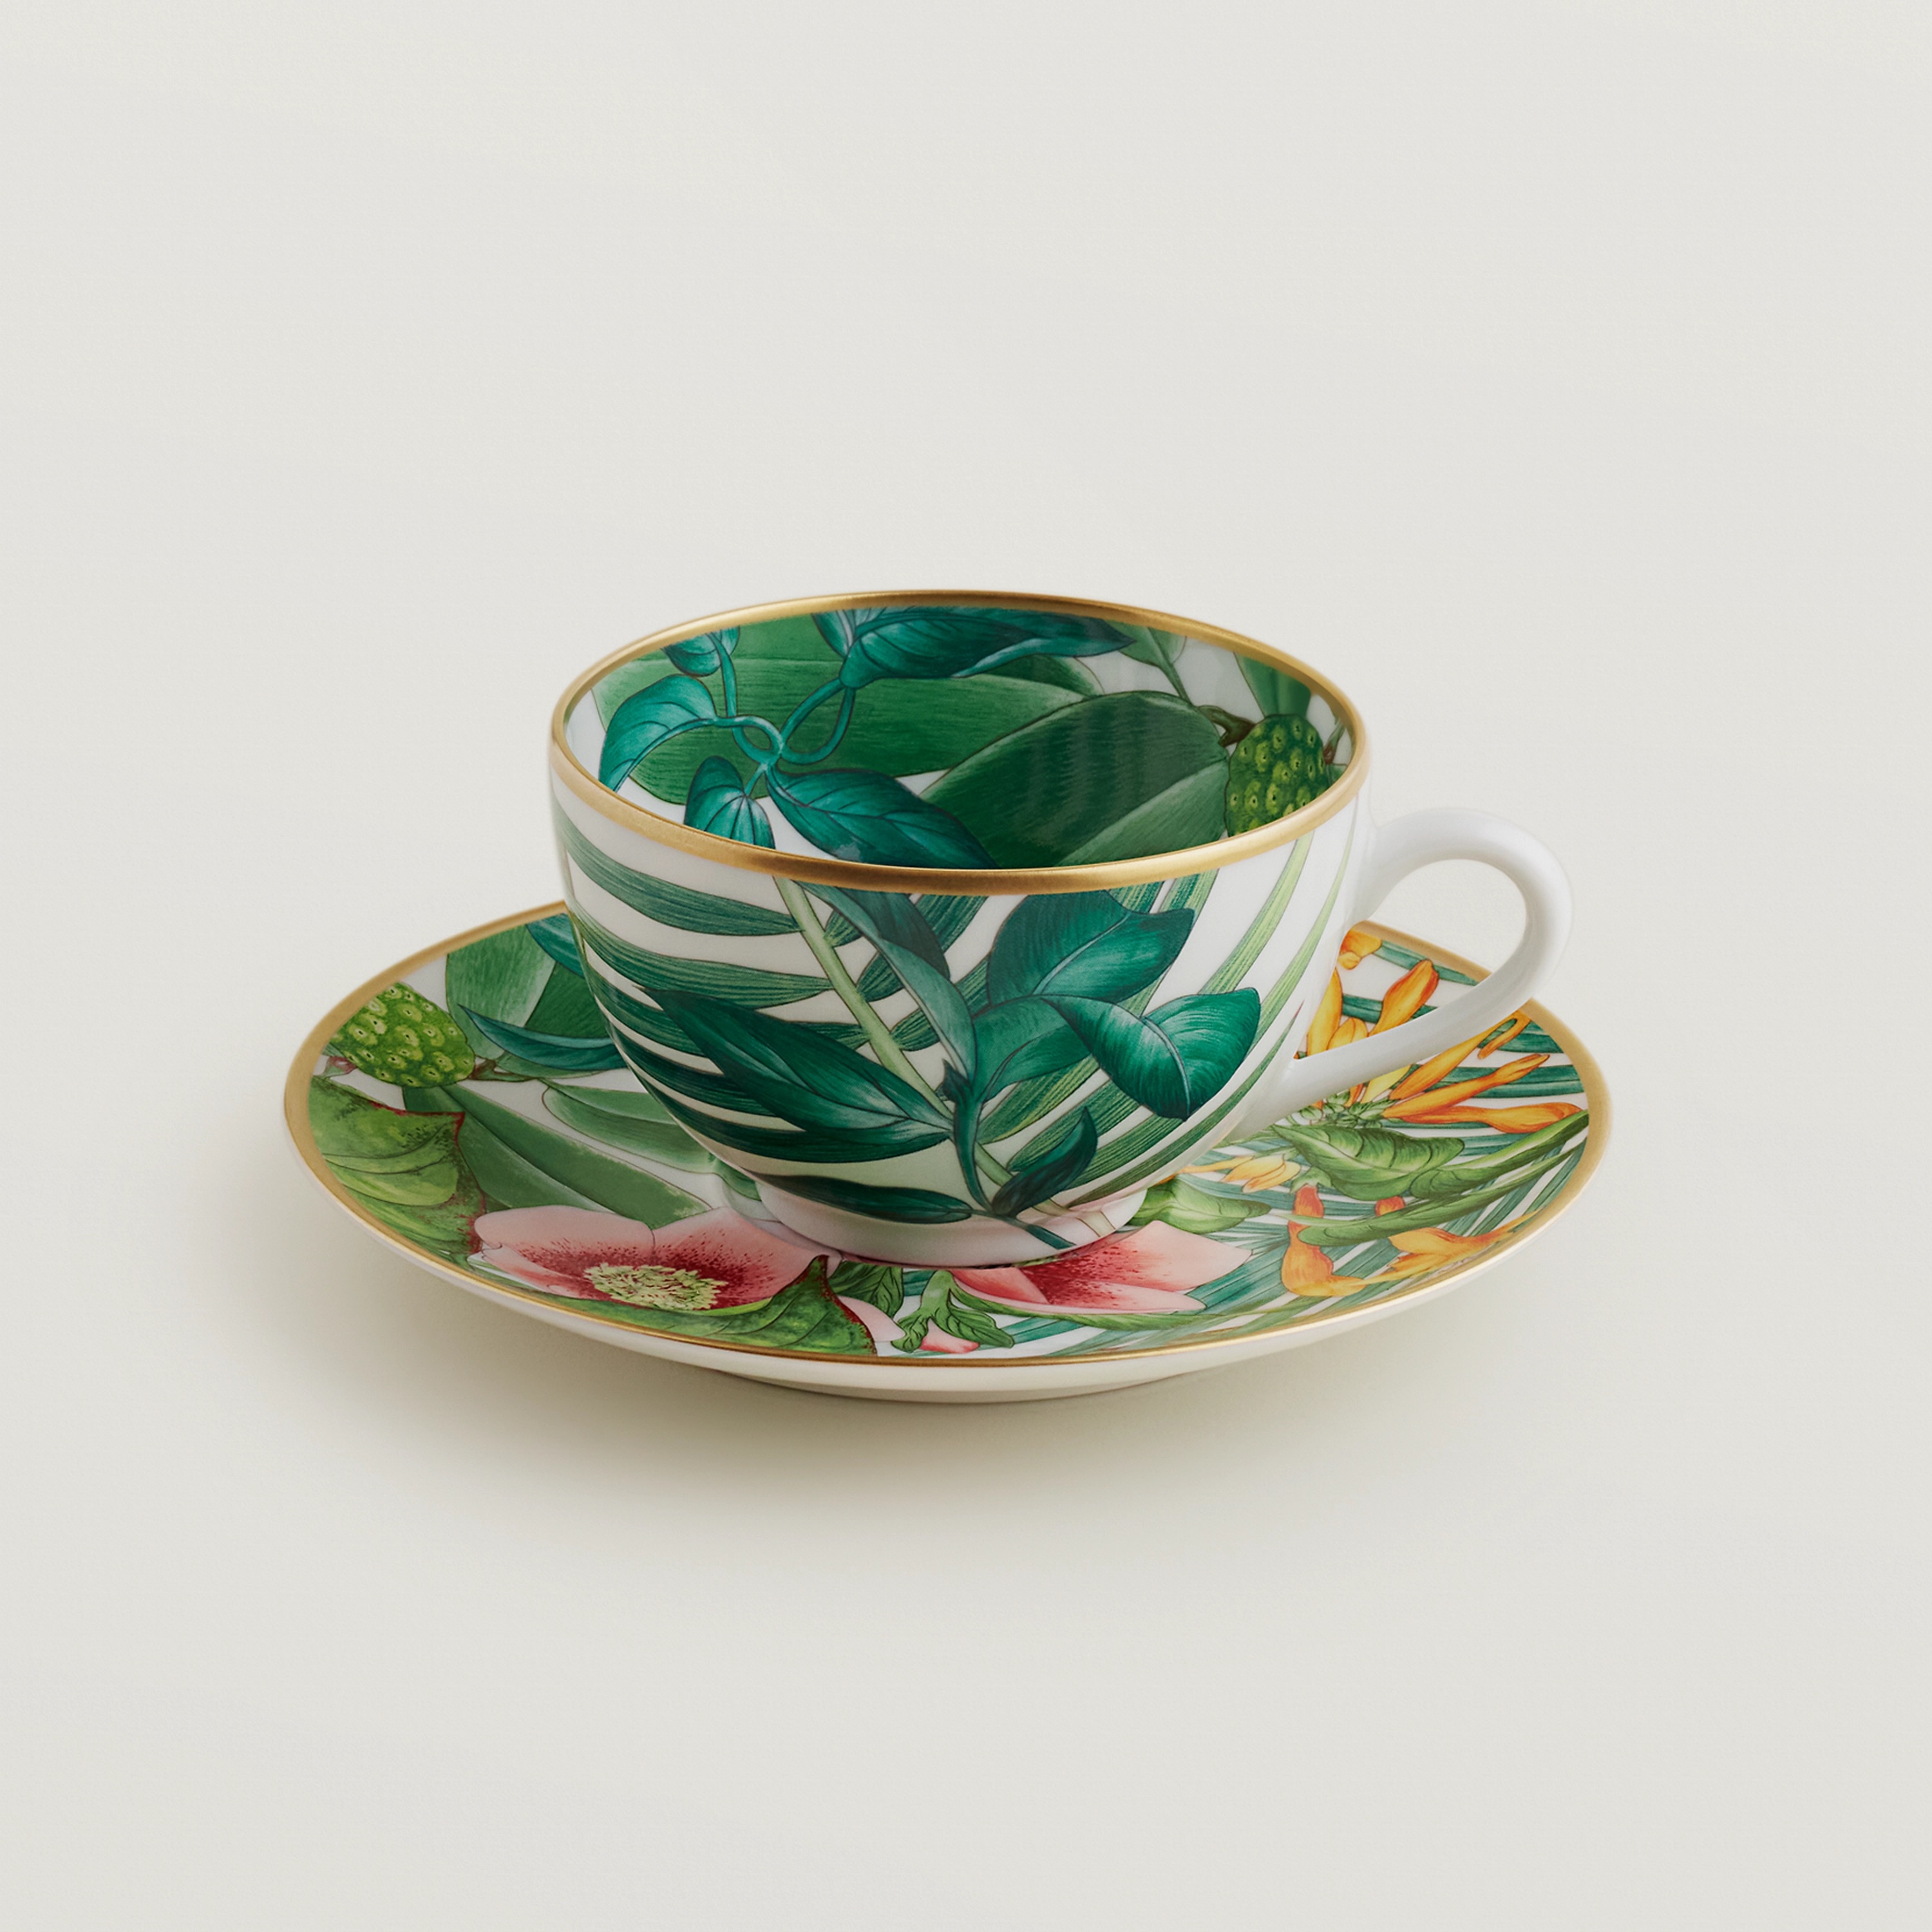 Passifolia Tea Cup and Saucer in porcelain, hermes pre owned perfume bottle silk scarf items.com.